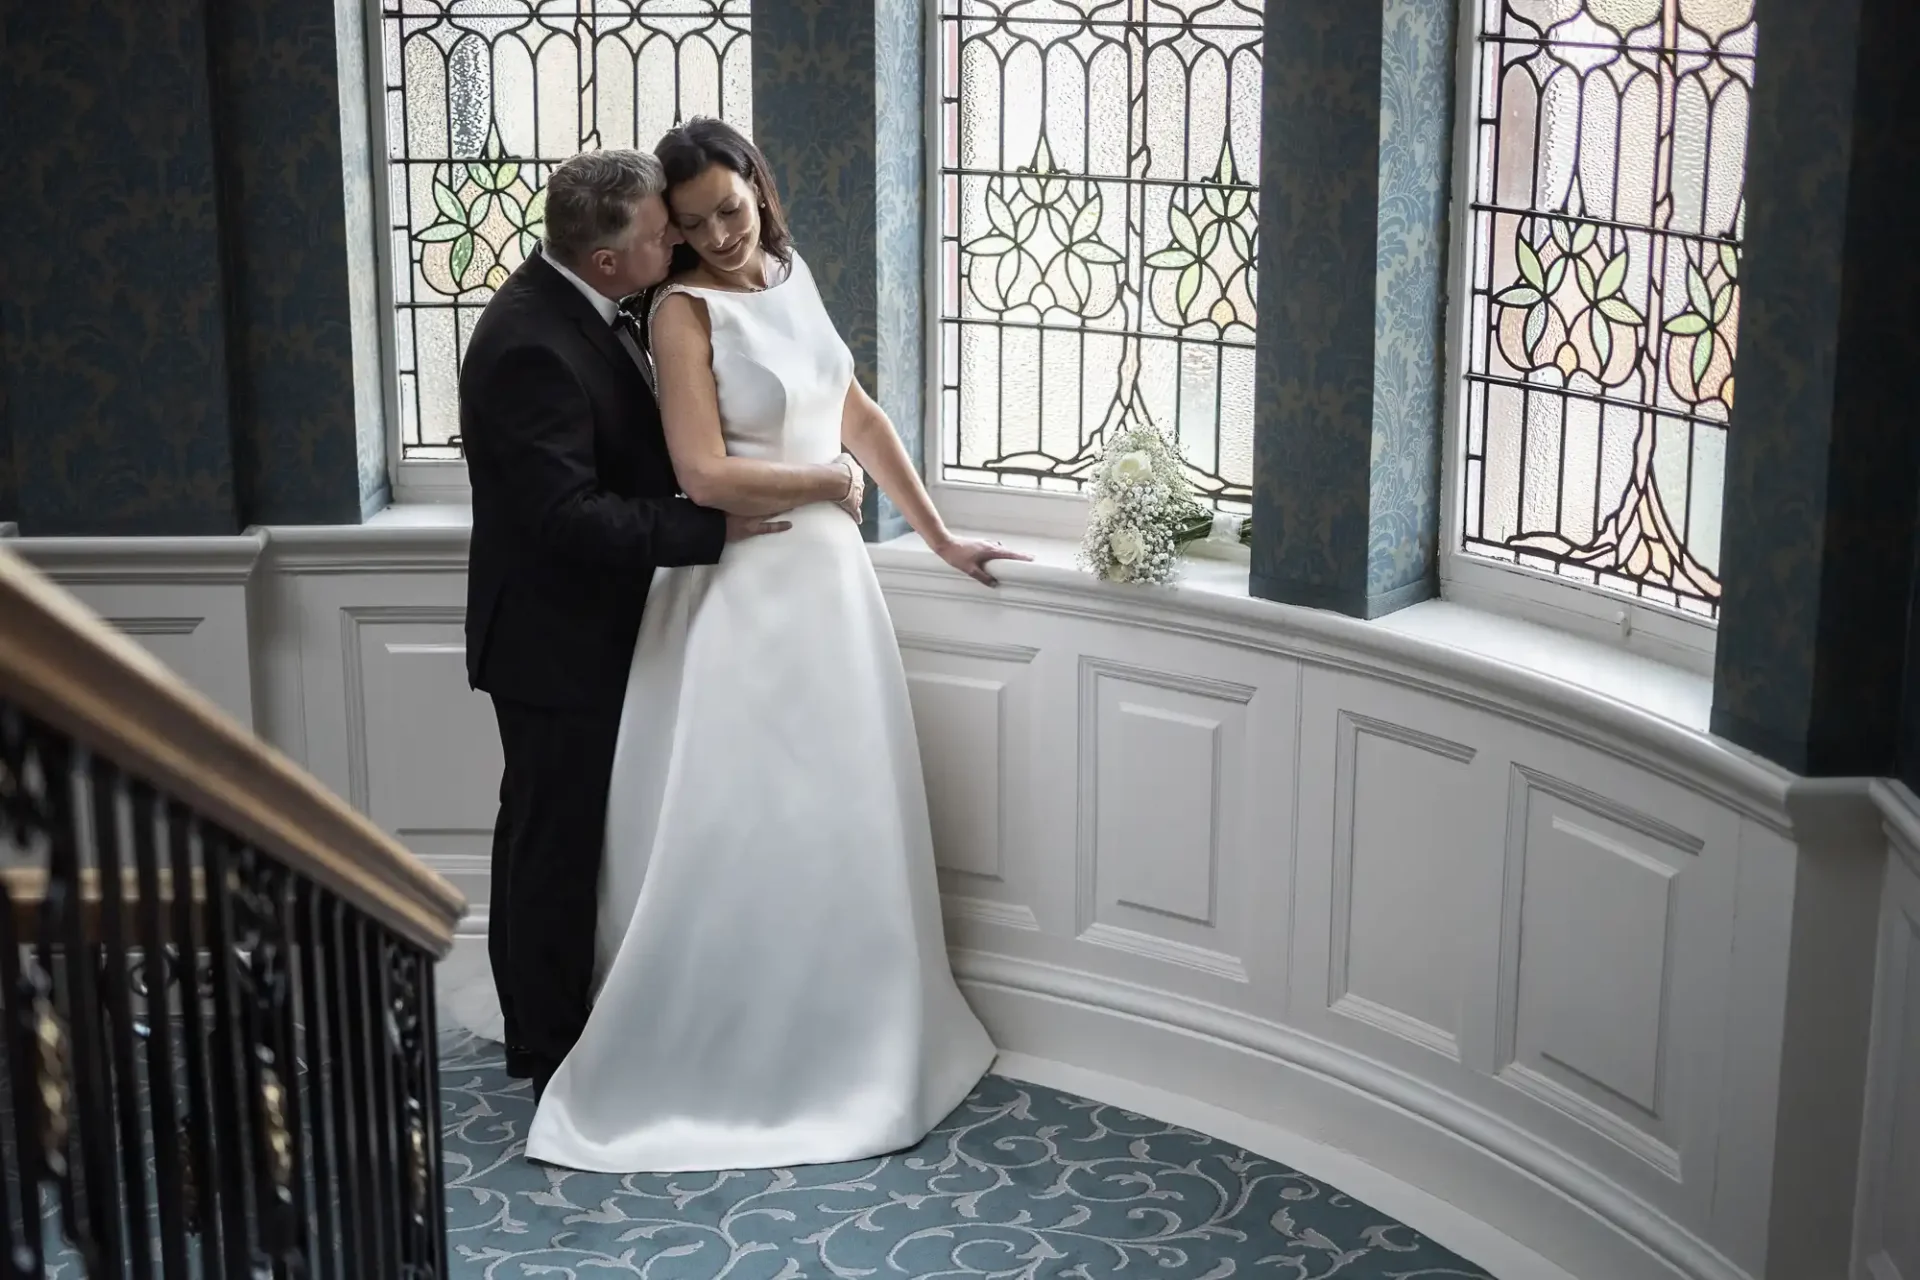 A newlywed couple embracing near a window with stained glass panels, the bride in a white gown and the groom in a suit.